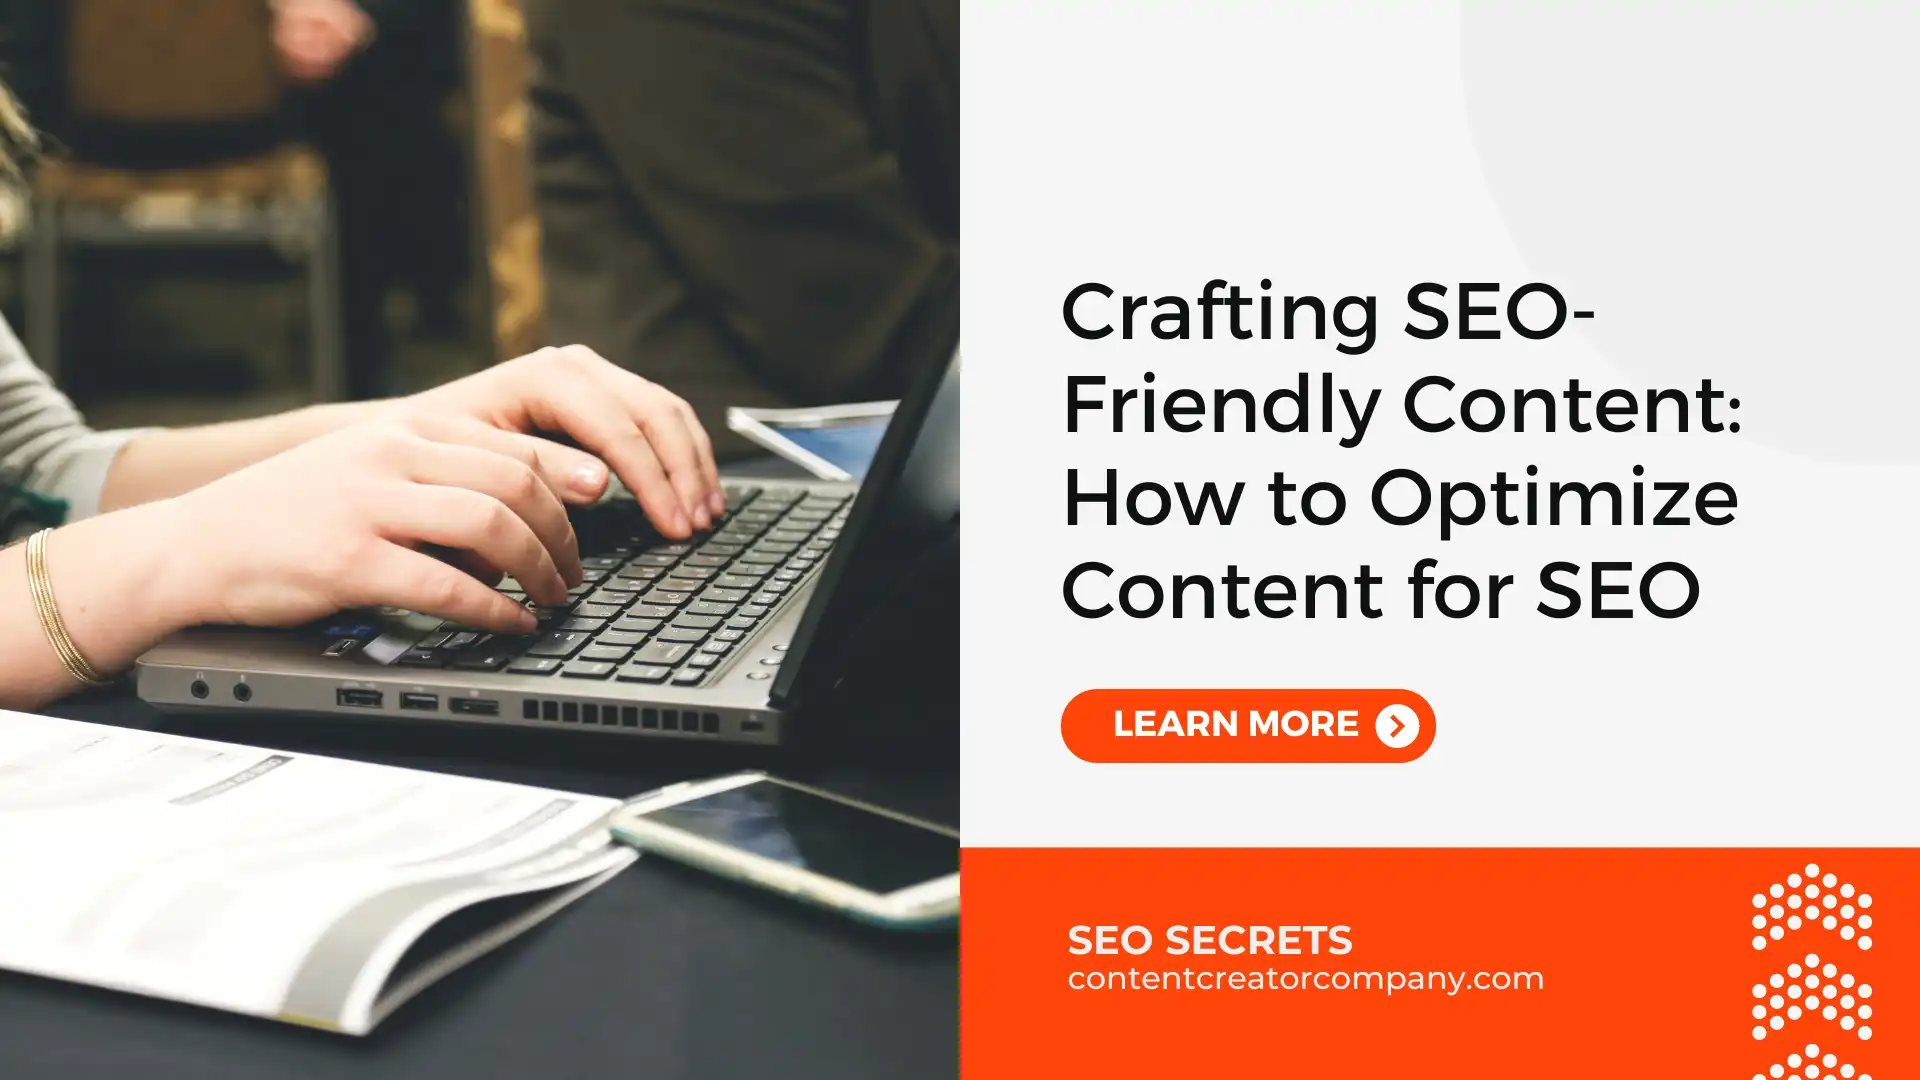 Crafting SEO-Friendly Content: How to Optimize Content for SEO